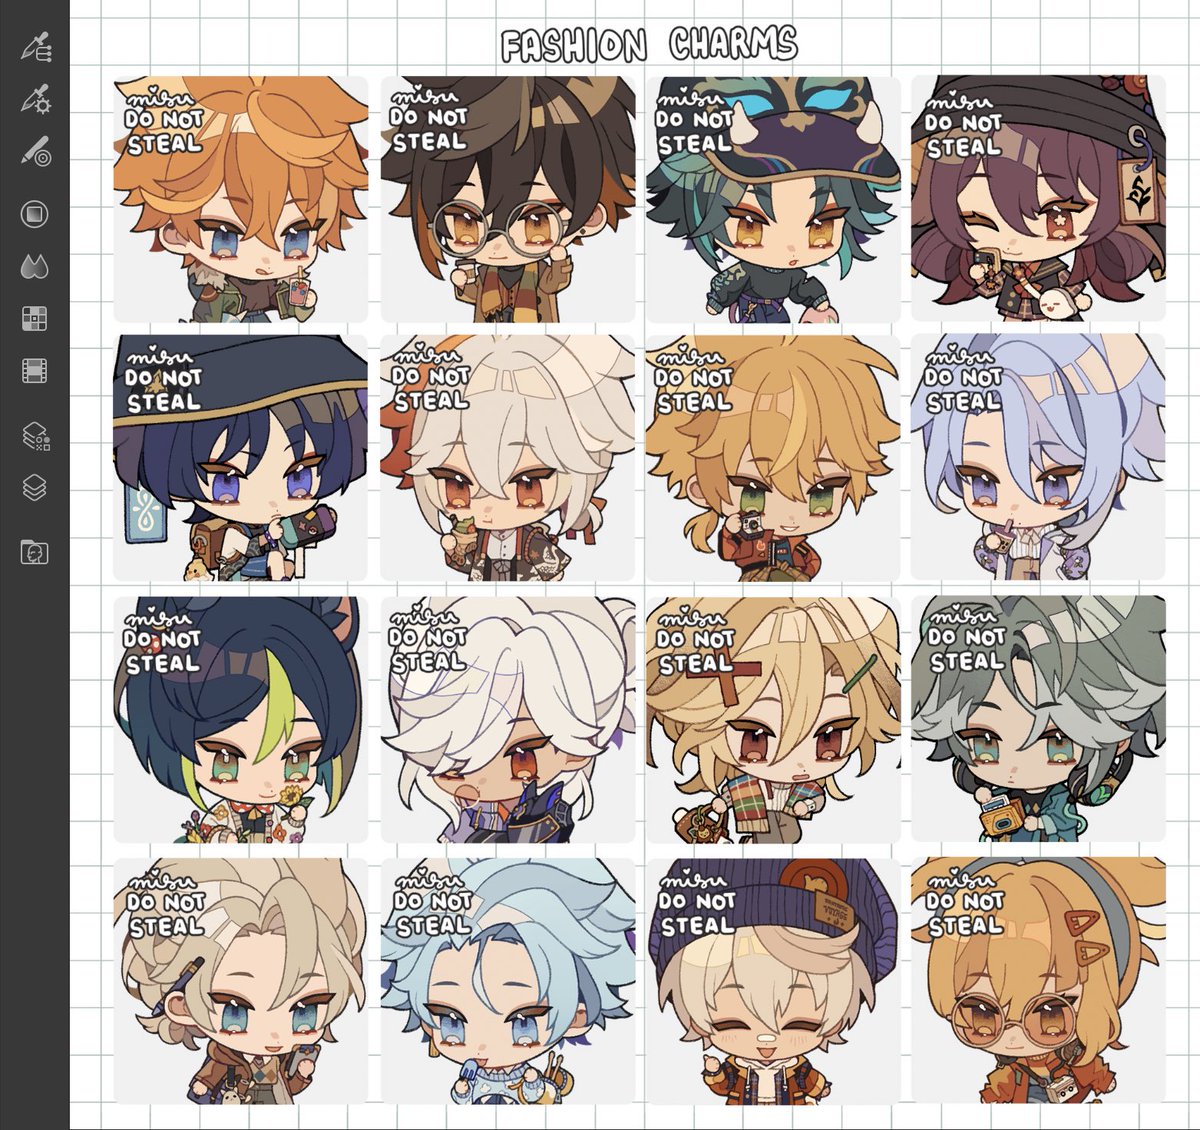 interest check for doujima! please let me know which set you're most interested in! i'll have a poll below 🙏 feel free to let me know which characters you like too! 🥺💖 